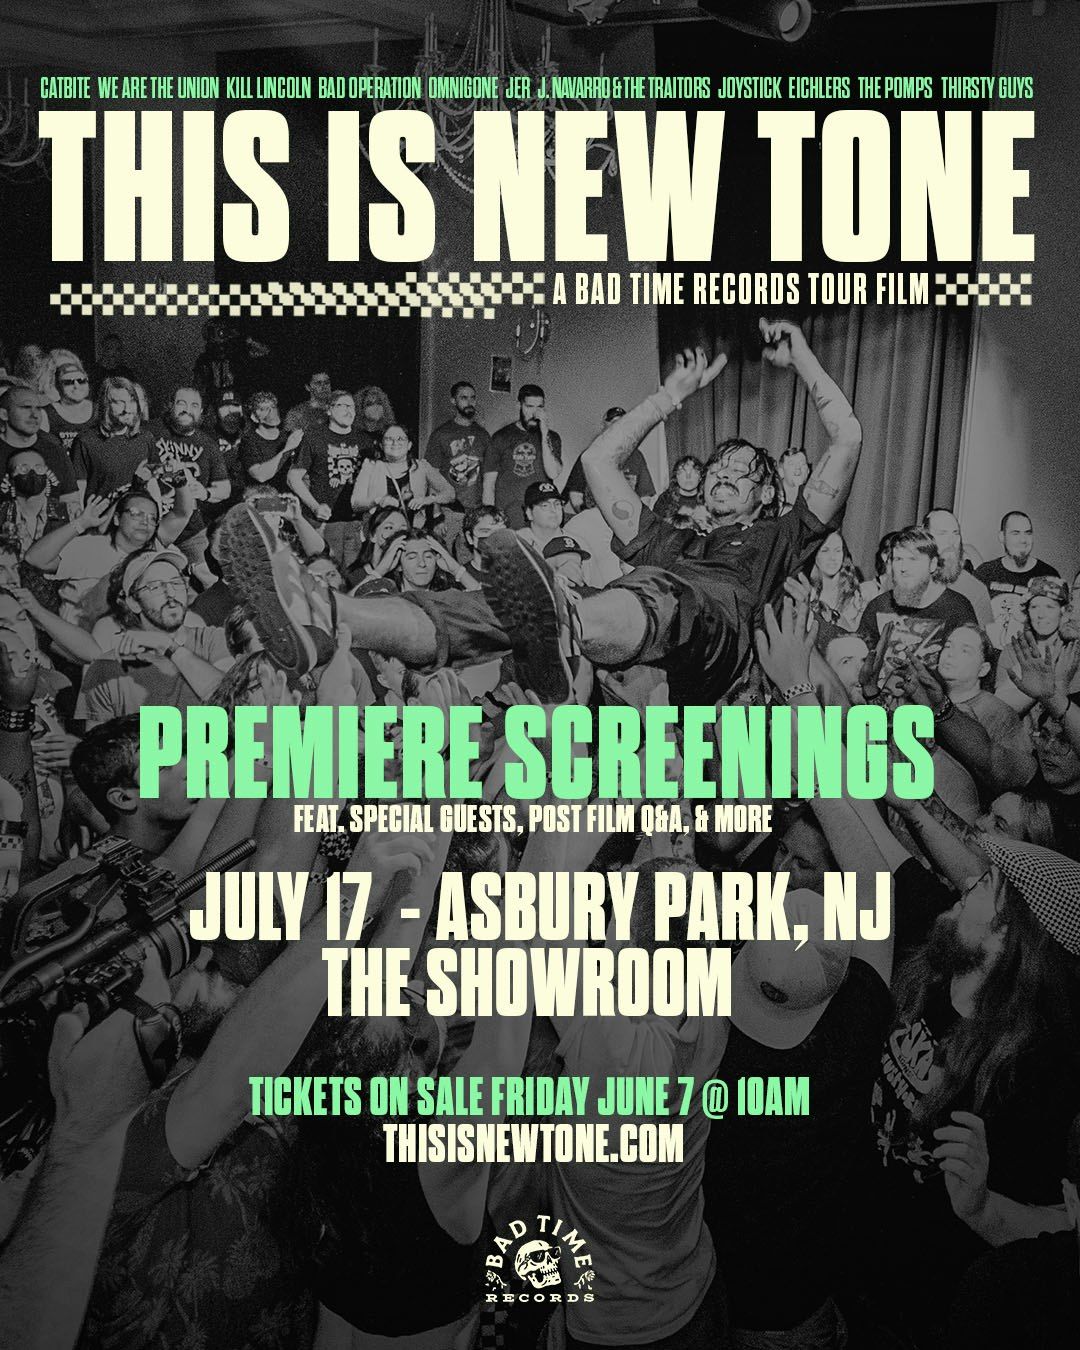 This is New Tone: A Bad Time Records Tour Film